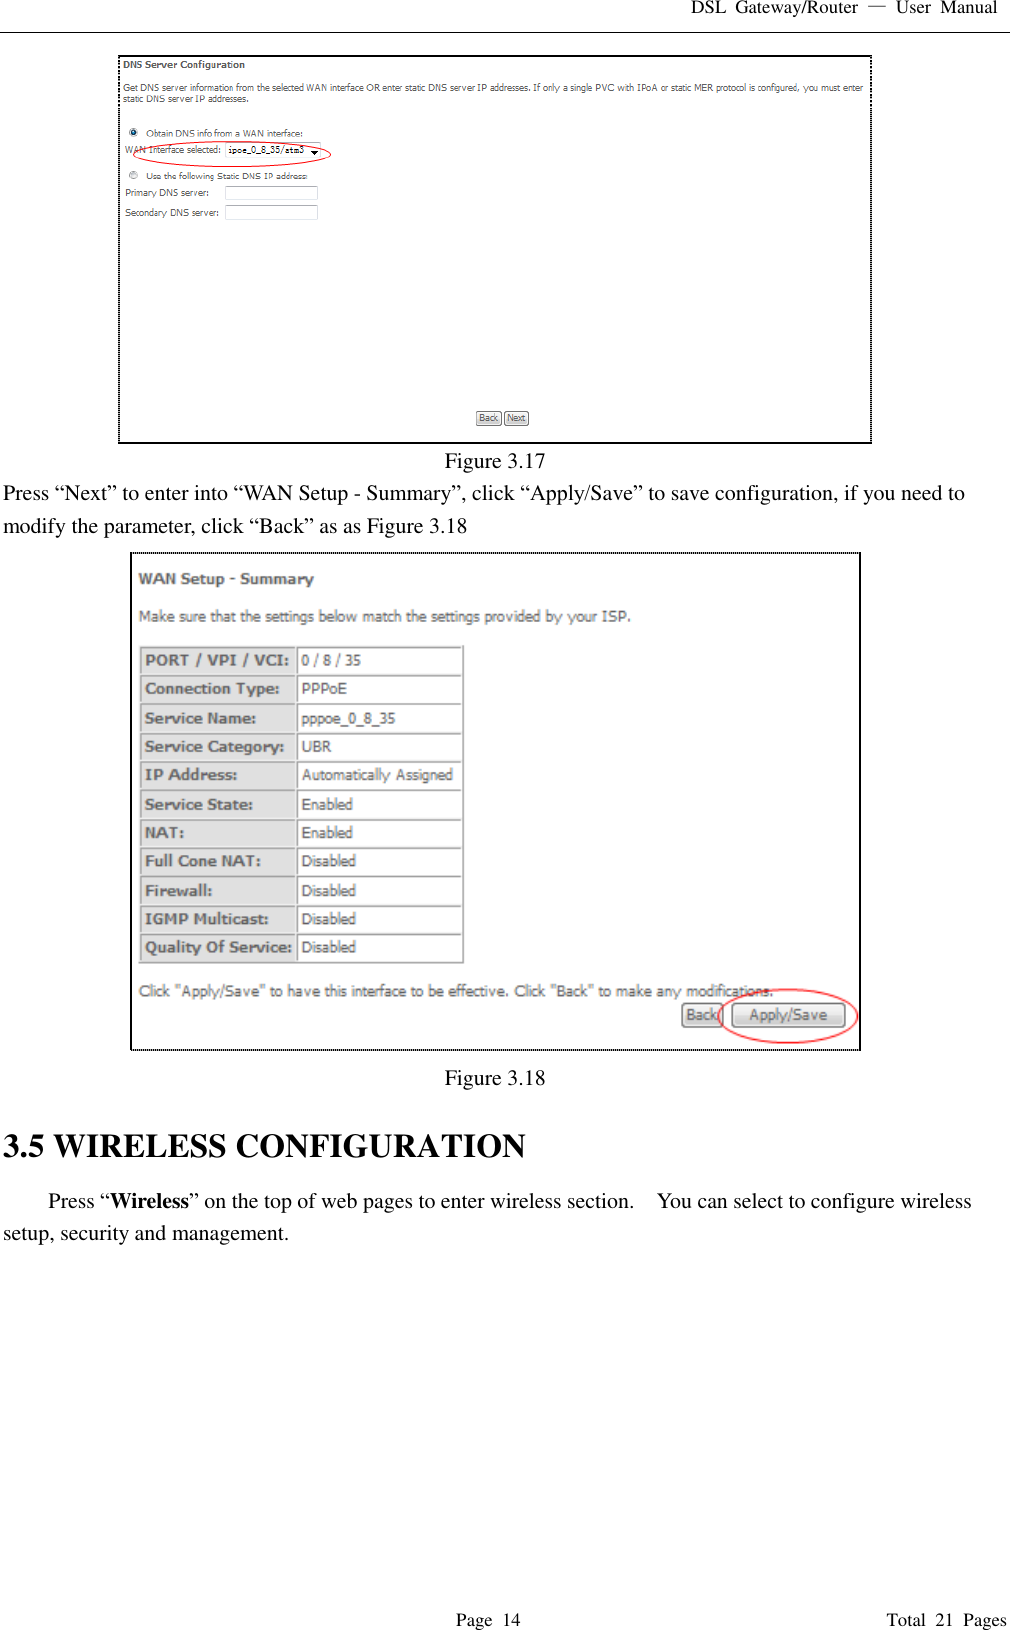 DSL  Gateway/Router  —  User  Manual   Page  14                                                                              Total  21  Pages  Figure 3.17 Press “Next” to enter into “WAN Setup - Summary”, click “Apply/Save” to save configuration, if you need to modify the parameter, click “Back” as as Figure 3.18  Figure 3.18  3.5 WIRELESS CONFIGURATION Press “Wireless” on the top of web pages to enter wireless section.    You can select to configure wireless setup, security and management.   